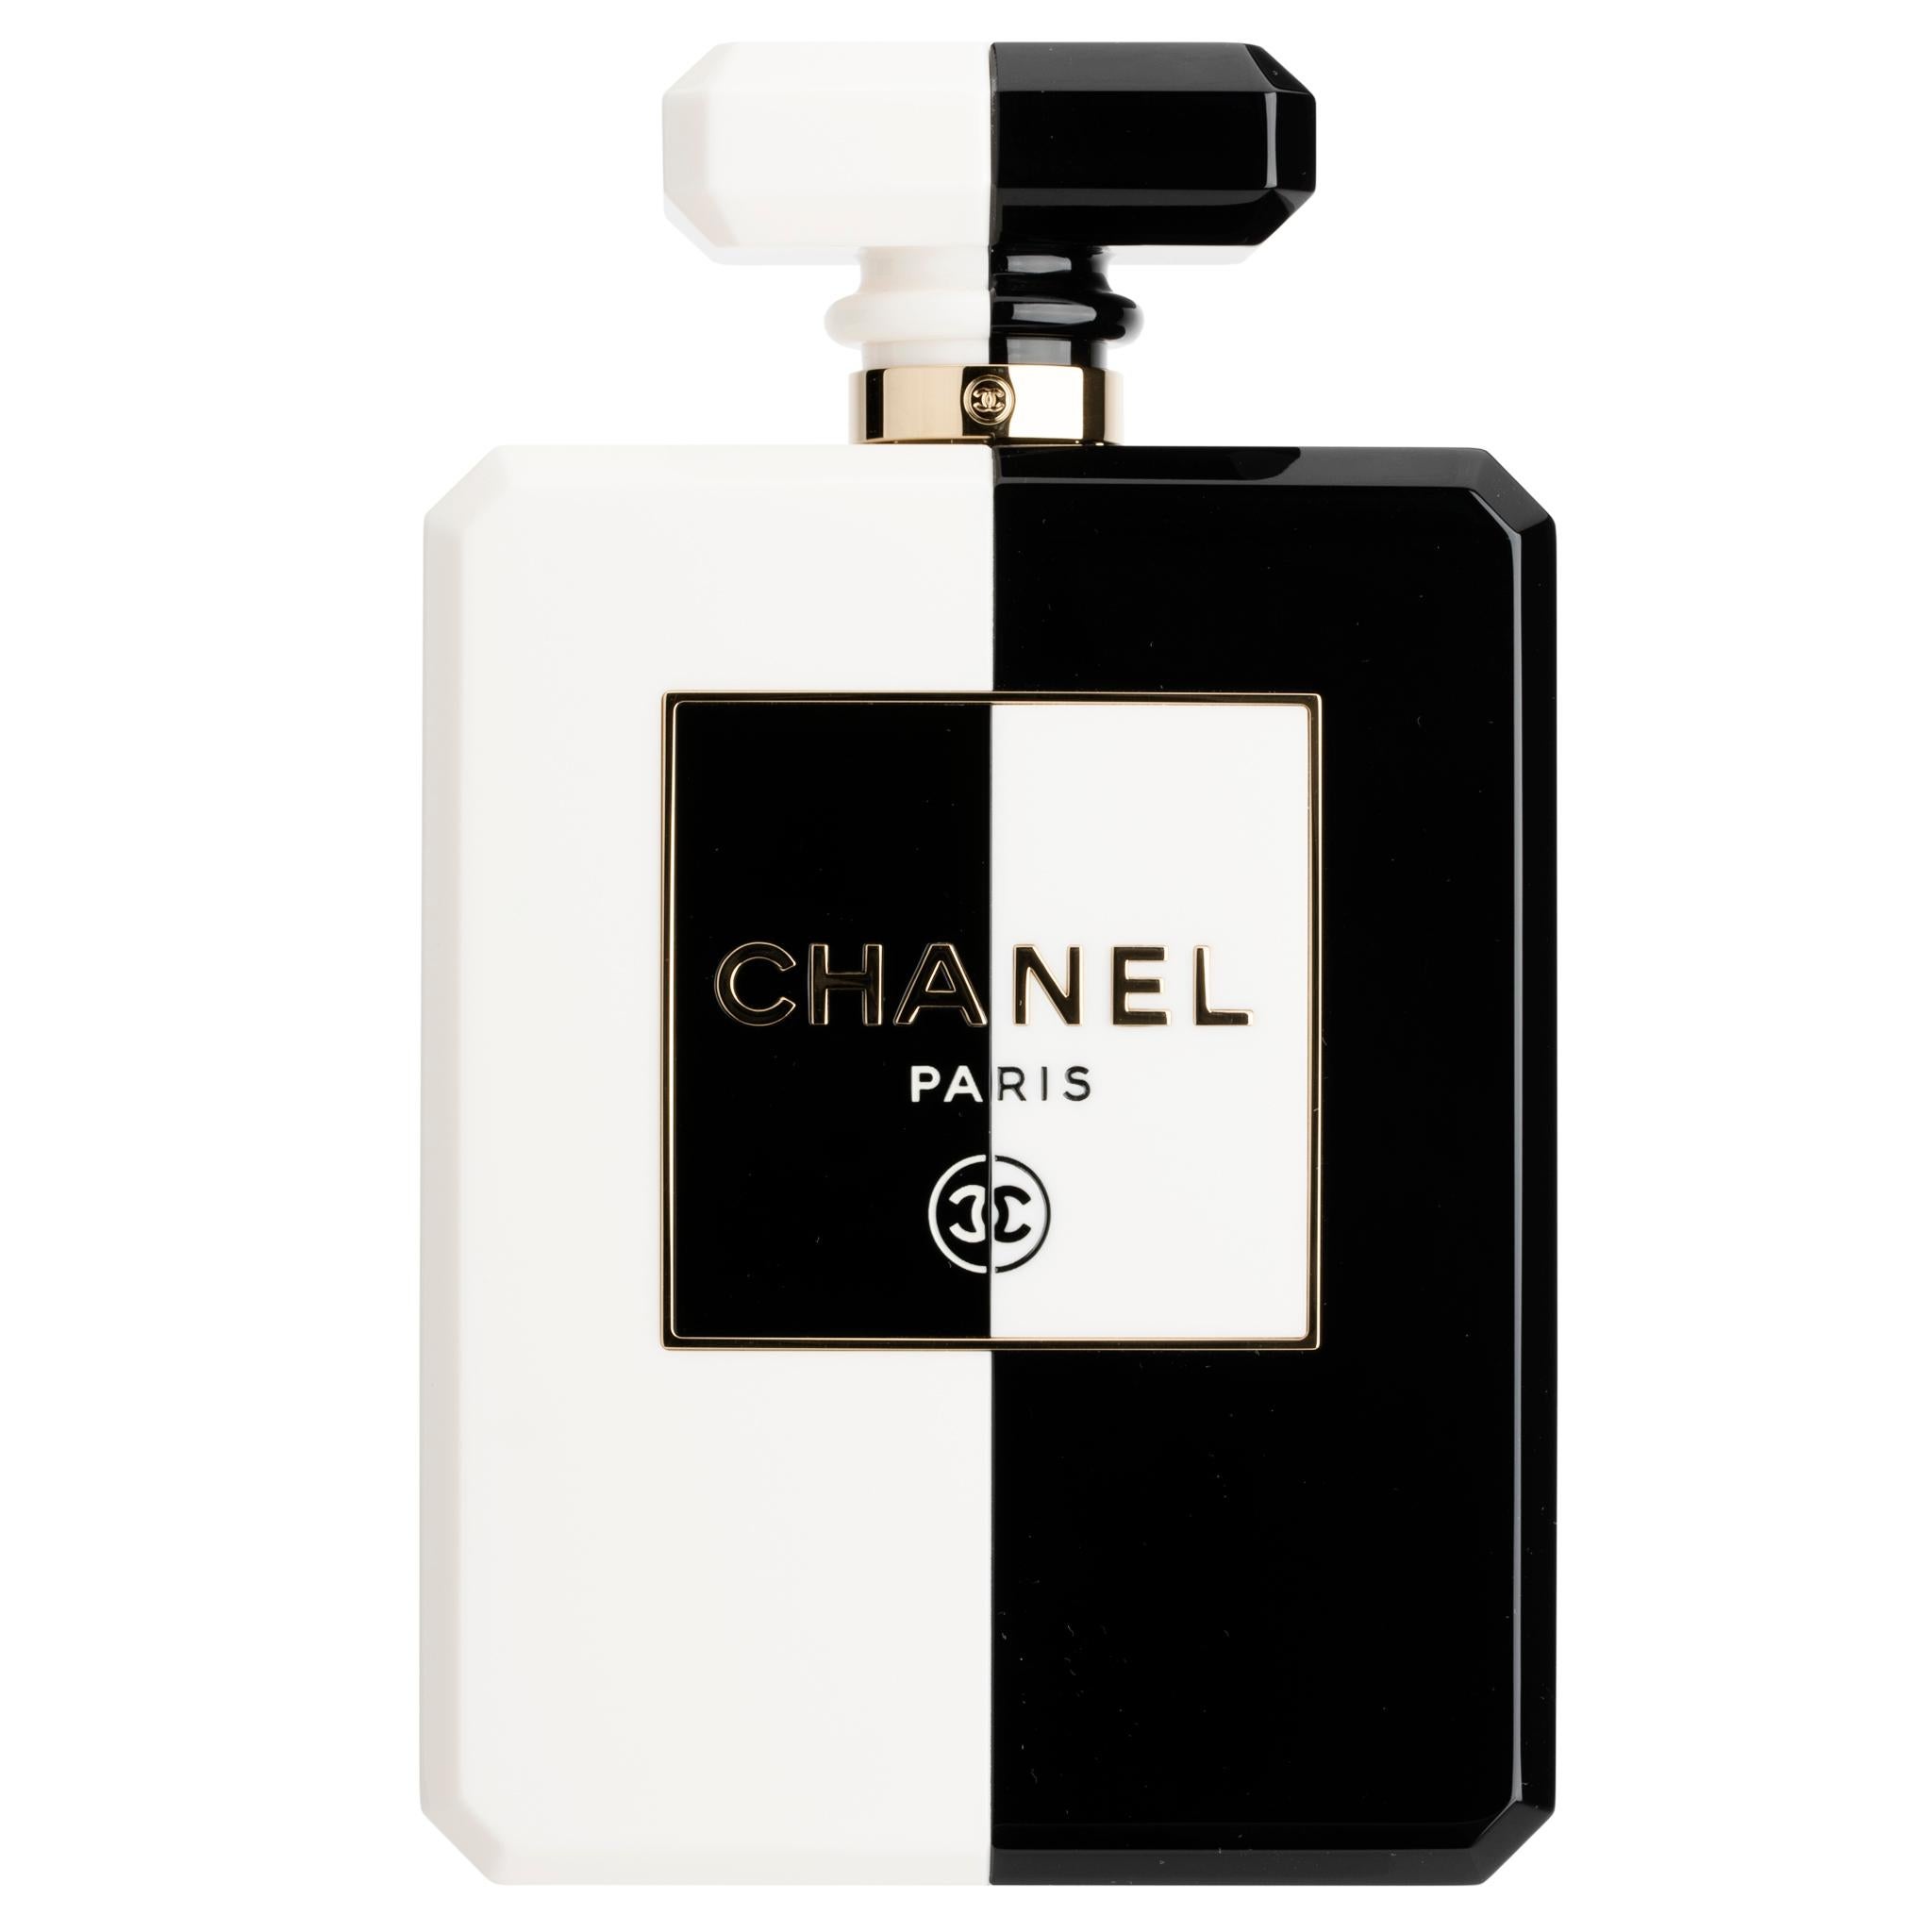 This stunning Chanel minaudière has been skilfully crafted from black and white lucite. The geometric use of shapes and colours, combined with accents of gold-tone hardware make this creation simplistically beautiful. The push lock clasp opens to